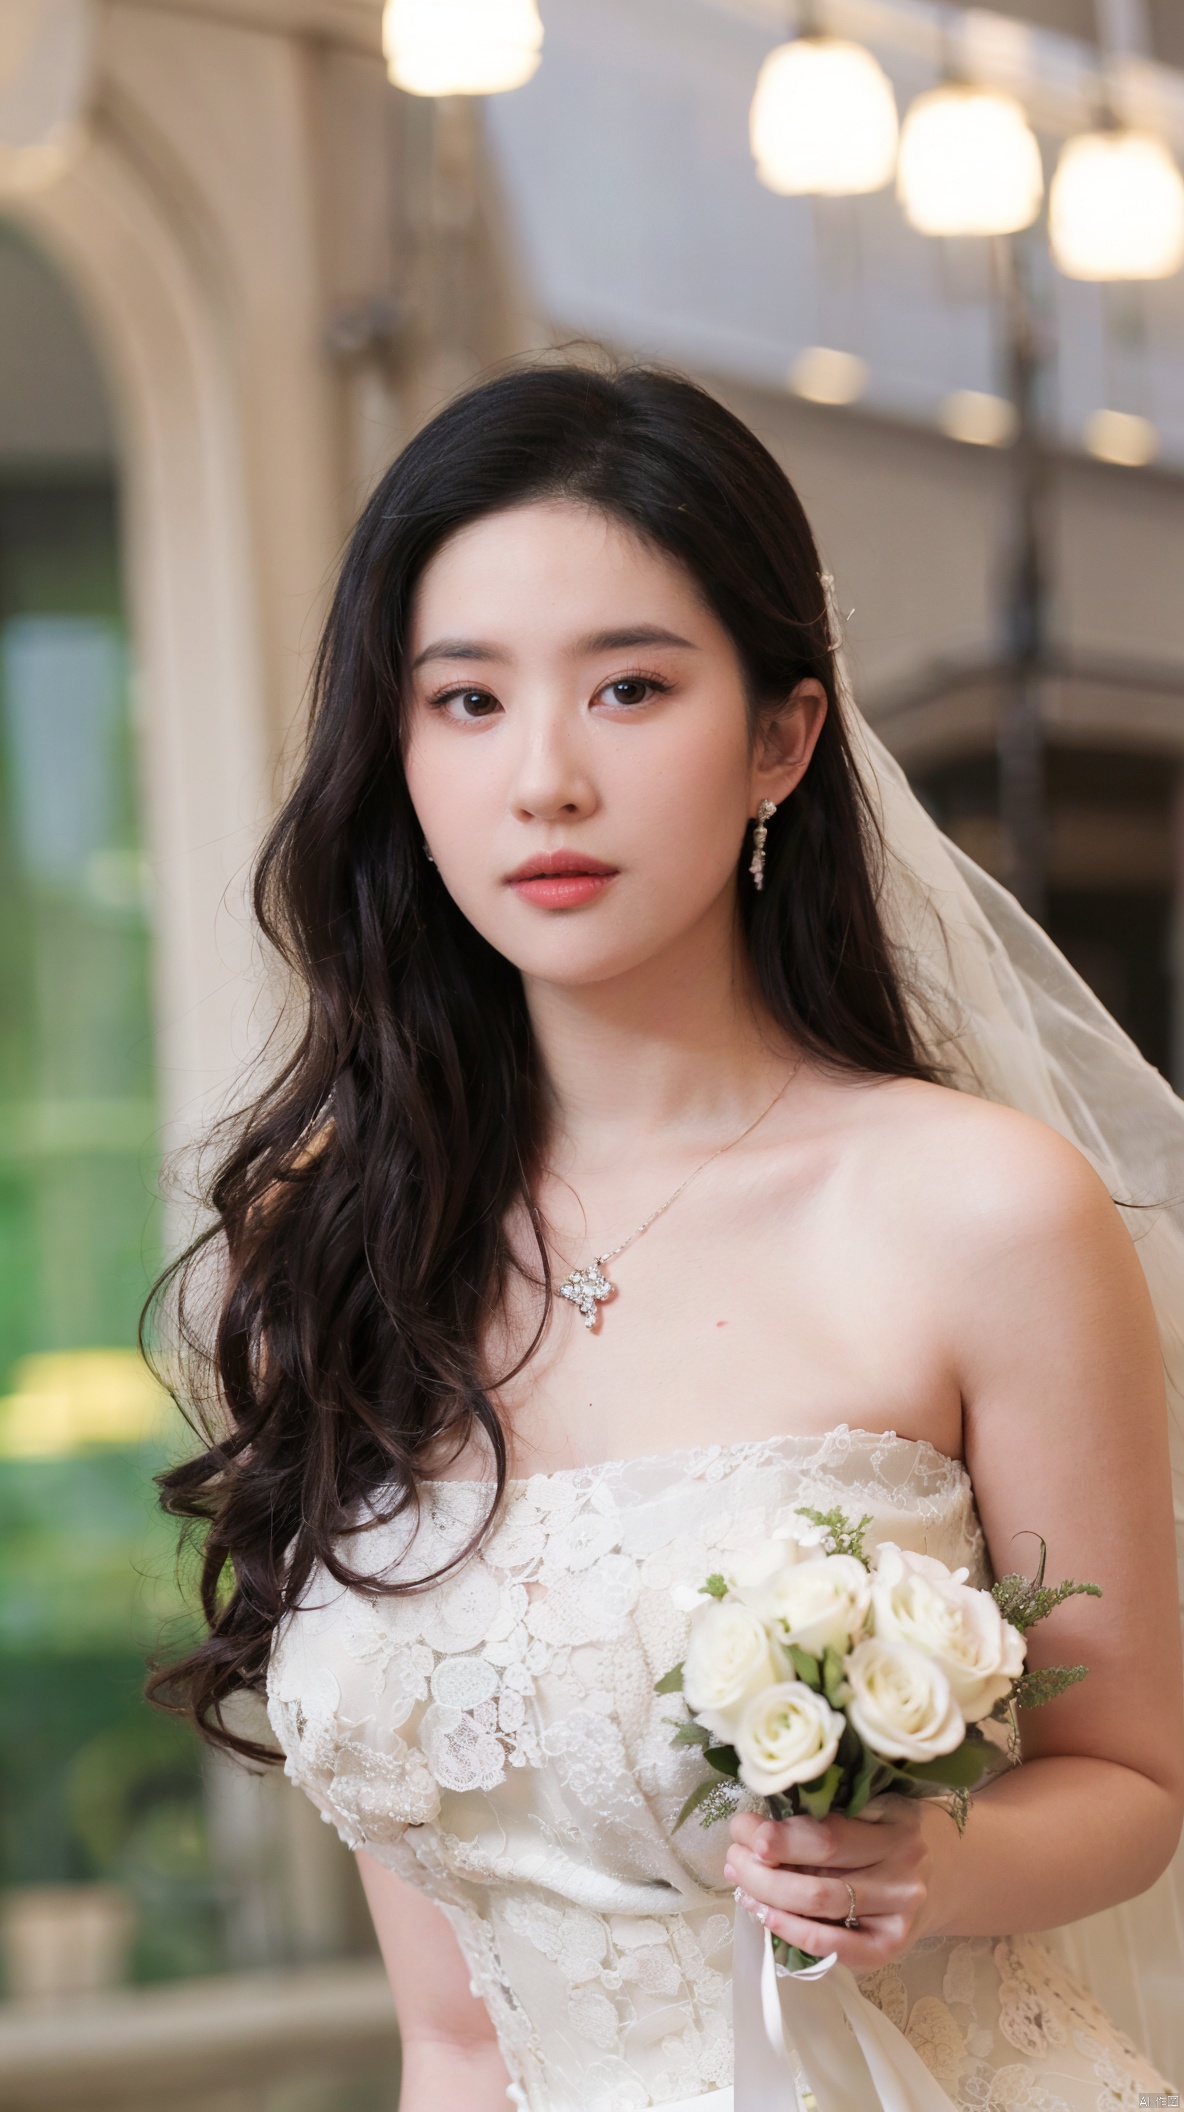  (beautiful, best quality, high quality, masterpiece:1.3)
,solo, solo focus,
huge breasts,Oval face, Water snake waist, big tits,big eye,
(green lace wedding dress:1.39), veil, wedding gloves, holding flowers,Crystal Earring, Crystal Necklace,
(no background),18yo girl, 1girl，Wallpaper,fantasy hanging garden,blue sky,floating sea of flowers,colorful flowers,Crystal Fountain,HD Detail,Wet Watermark,Ultra Detail,Cinematic,Hyper Realism,Soft Light,Deep Field Focus Bokeh,Ray Tracing,Diffuse extra fine glass reflections and Hyper Realism